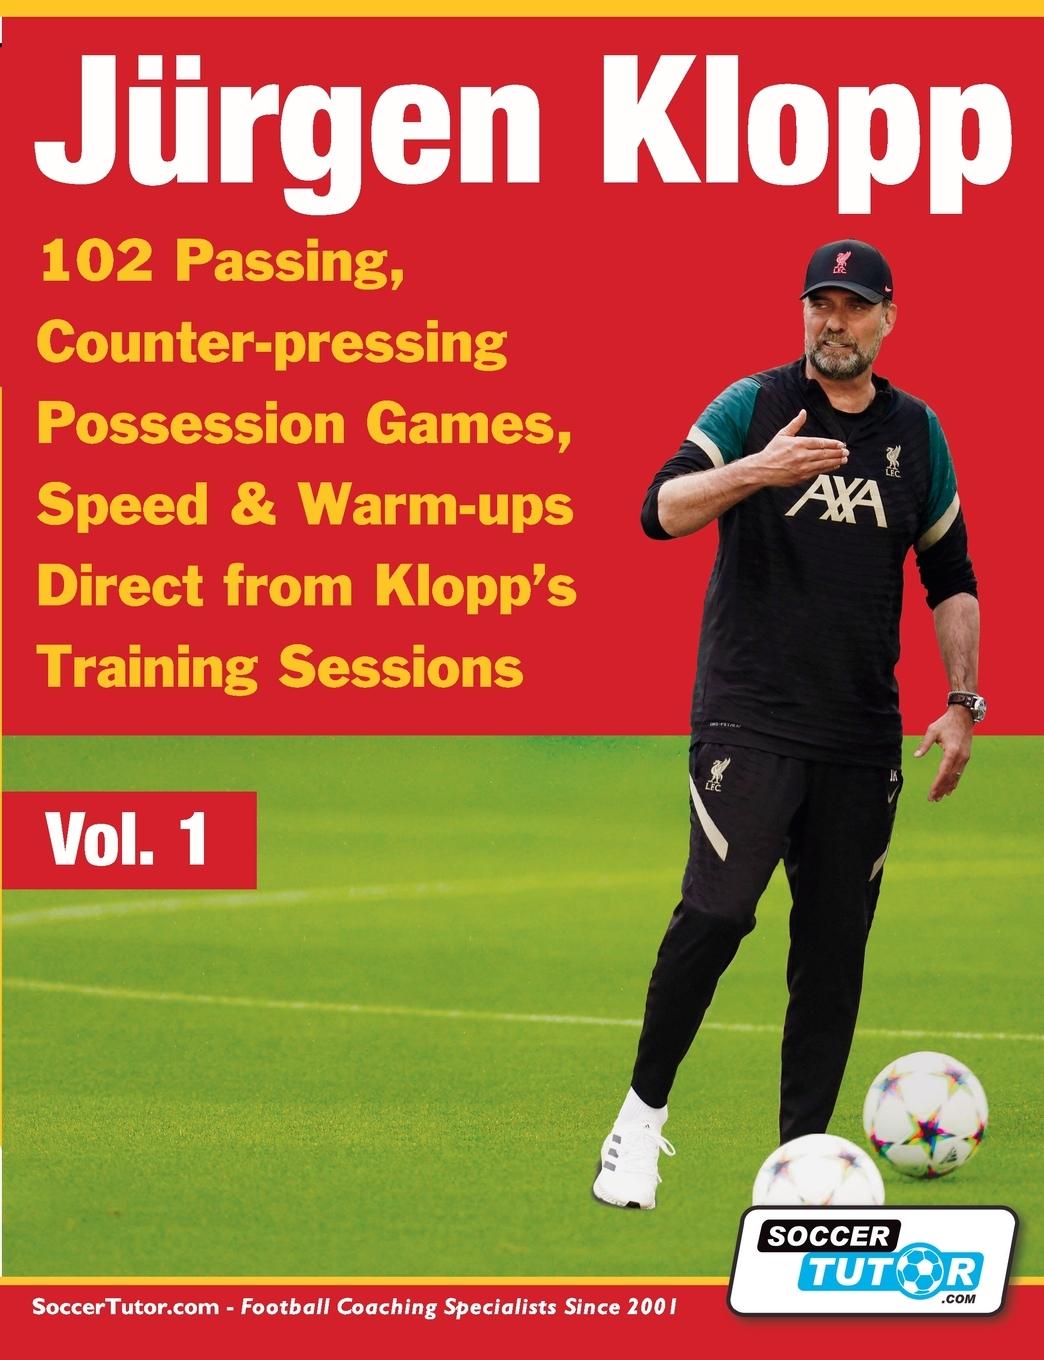 Book Jurgen Klopp - 102 Passing, Counter-pressing Possession Games, Speed & Warm-ups Direct from Klopp's Training Sessions 